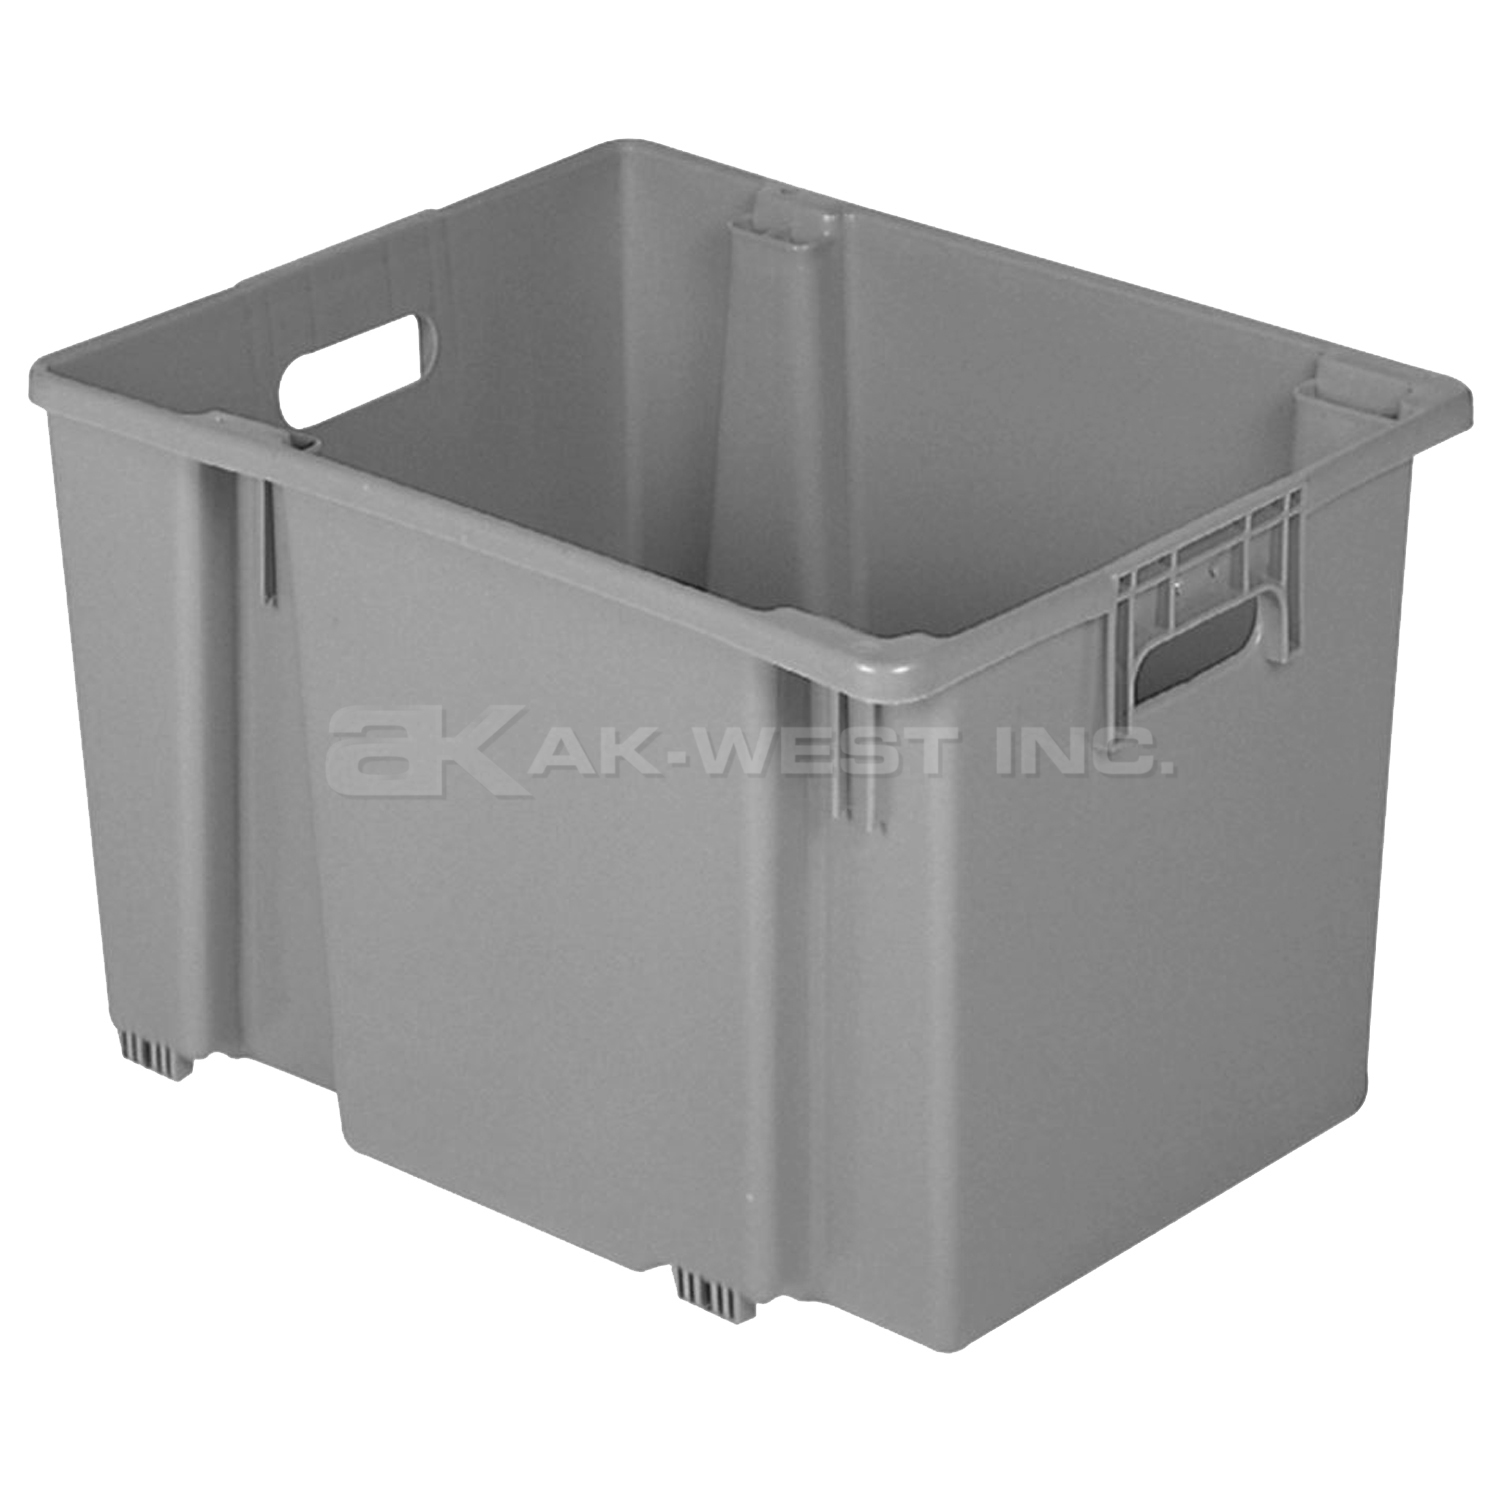 Grey, 20" x 16" x 12", Solid Stack and Nest Container, (Alt. M/N: 18-610)